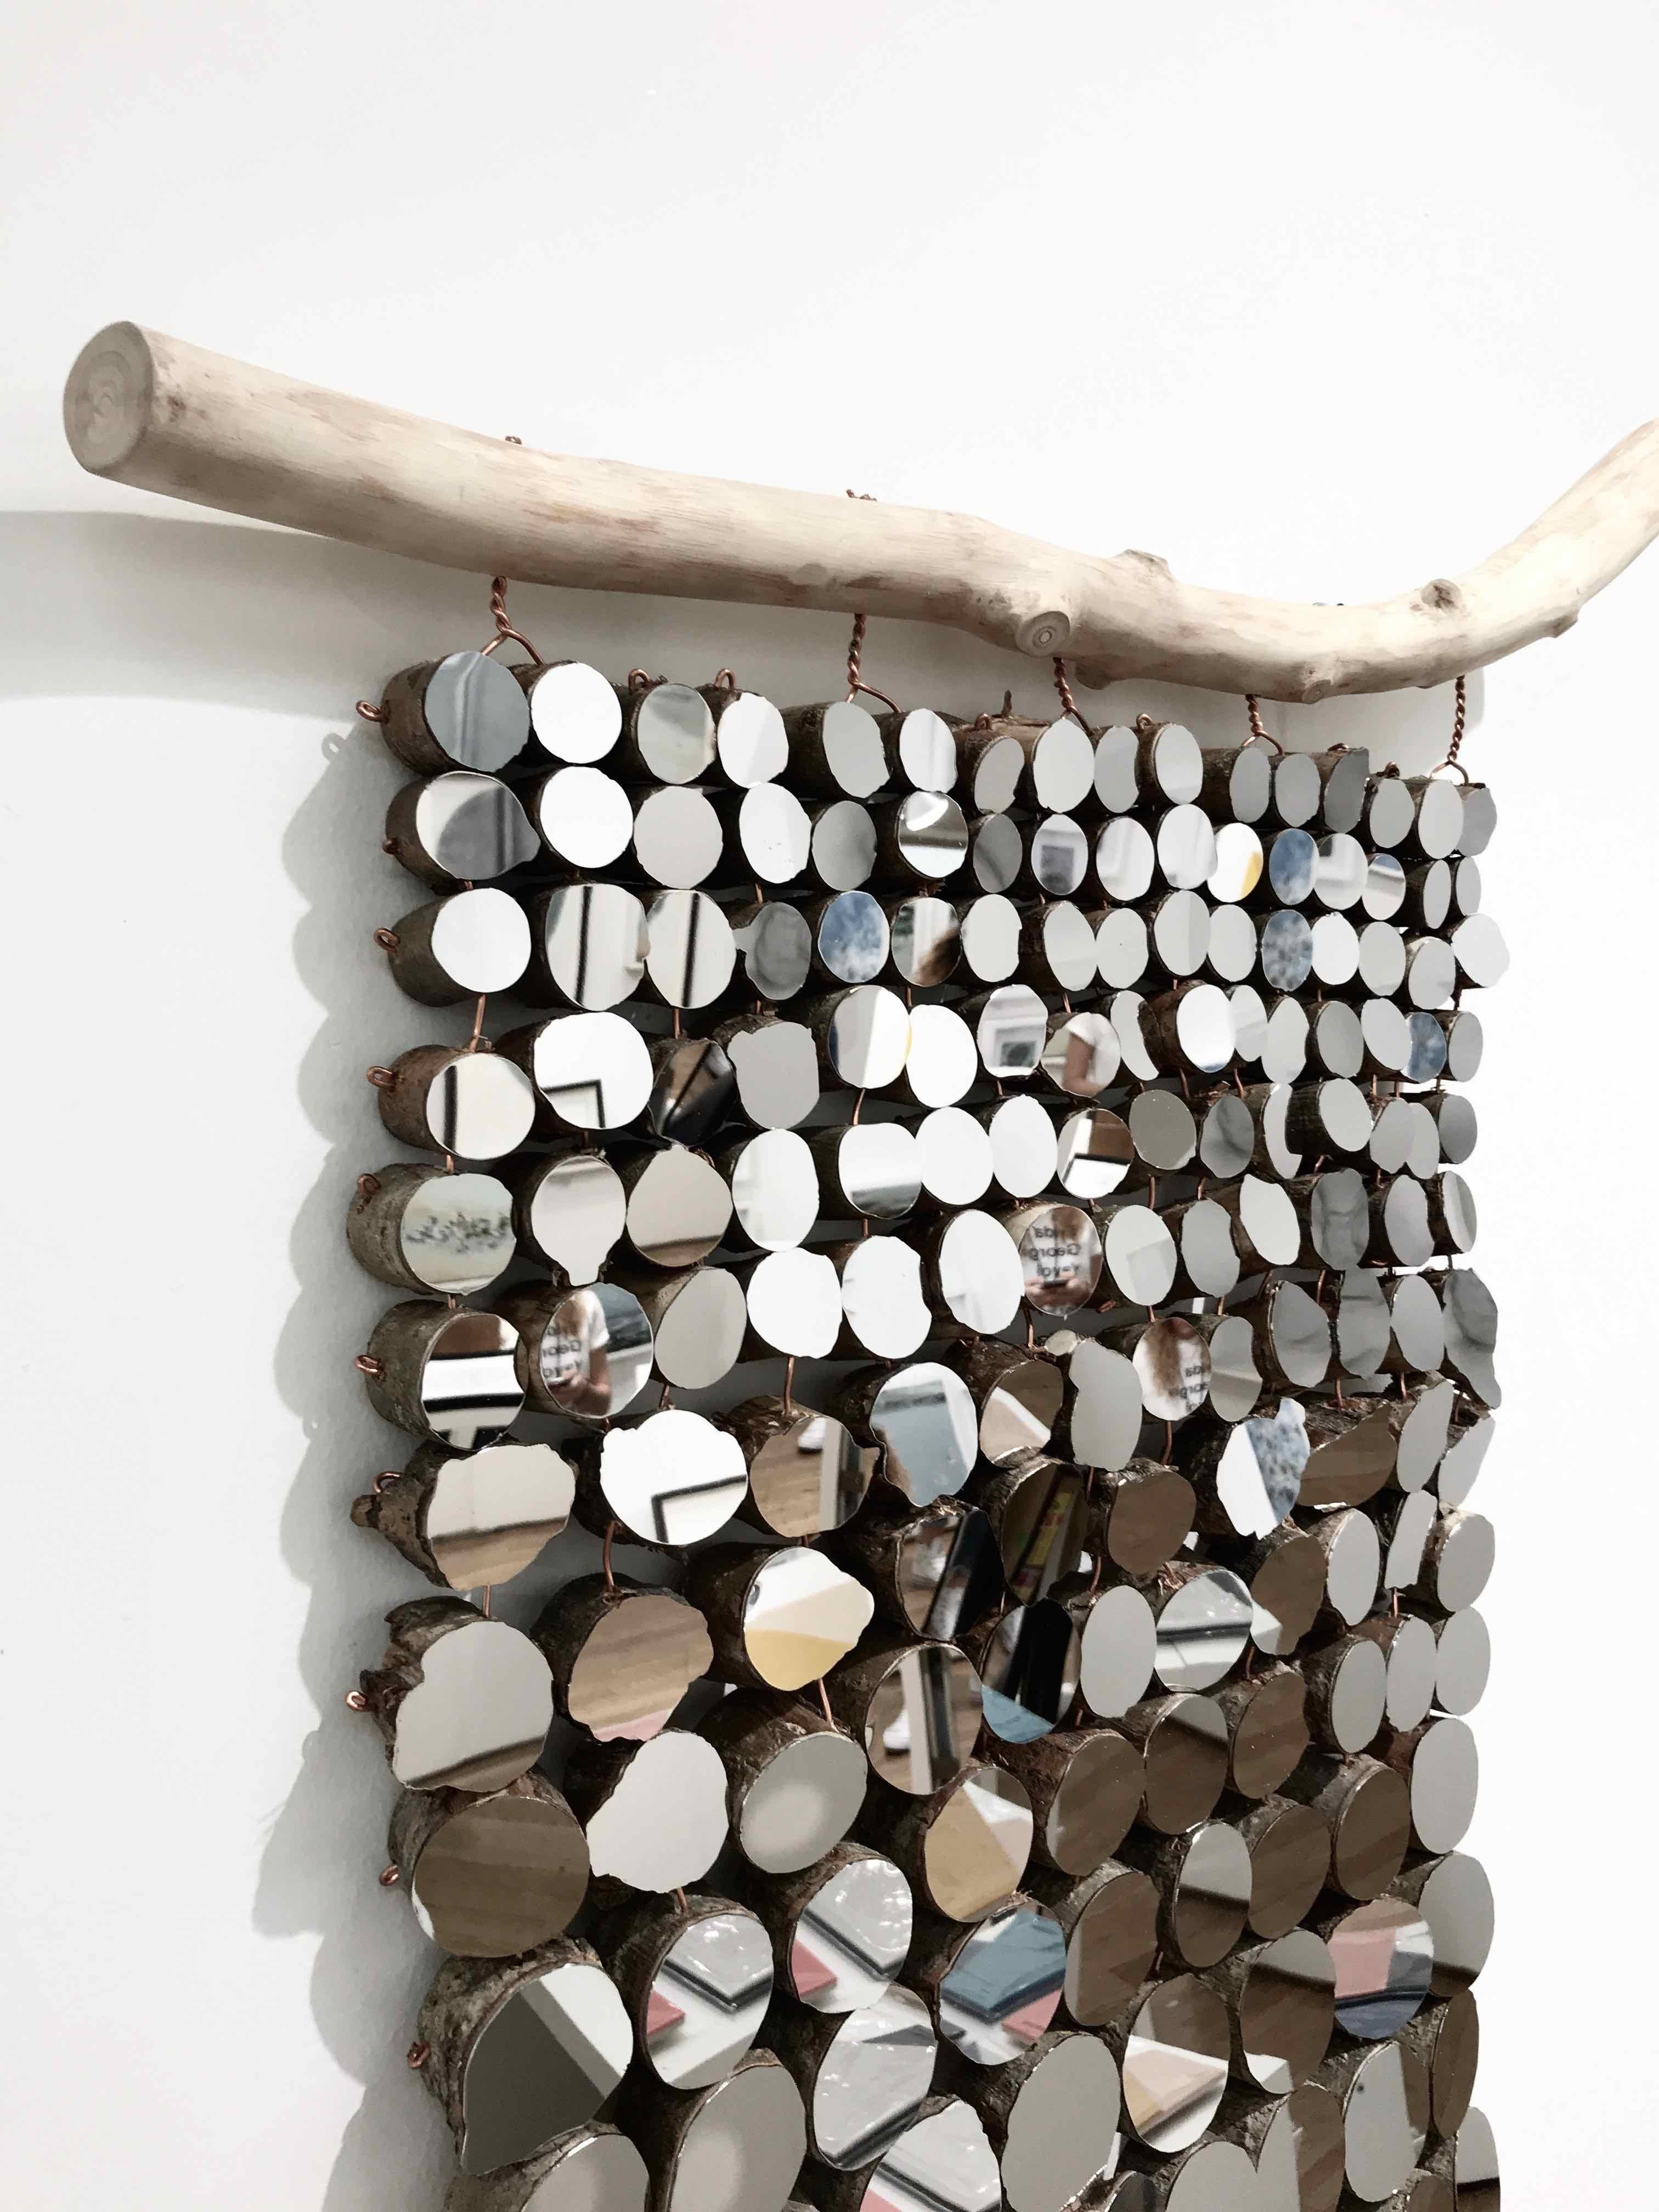 The Tidy Tapestry: A wall hanging of mirrors and fallen willow wood - Contemporary Sculpture by Lee Borthwick